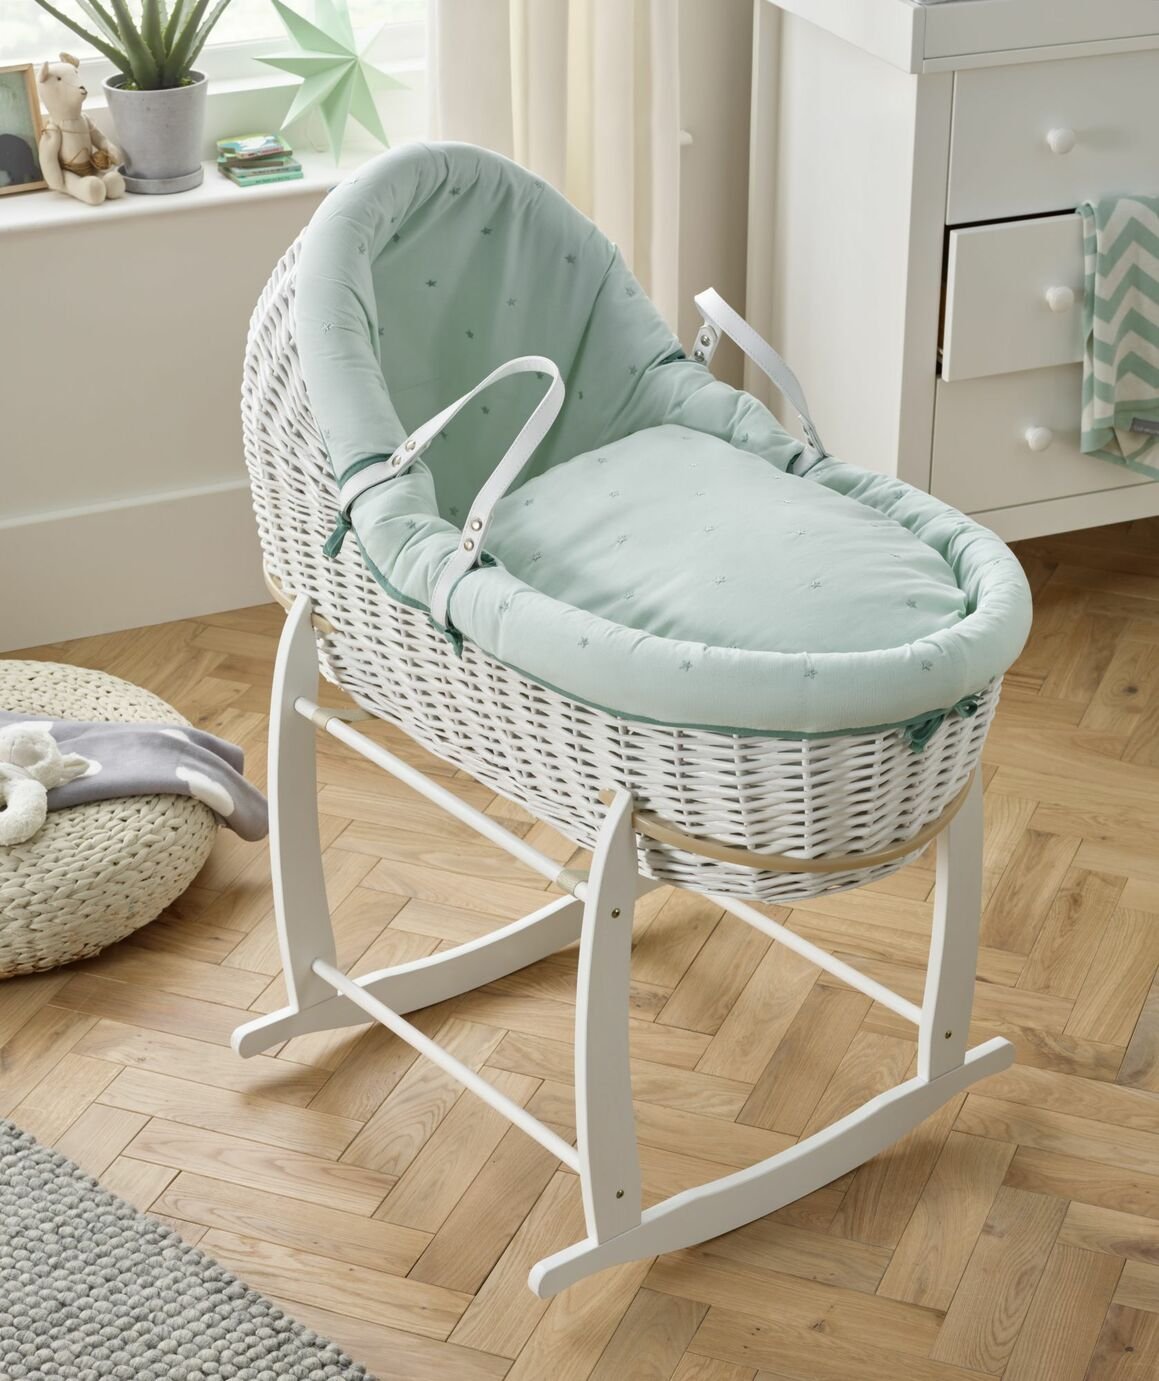 Clair de Lune Lullaby Stars Willow Bassinet Review